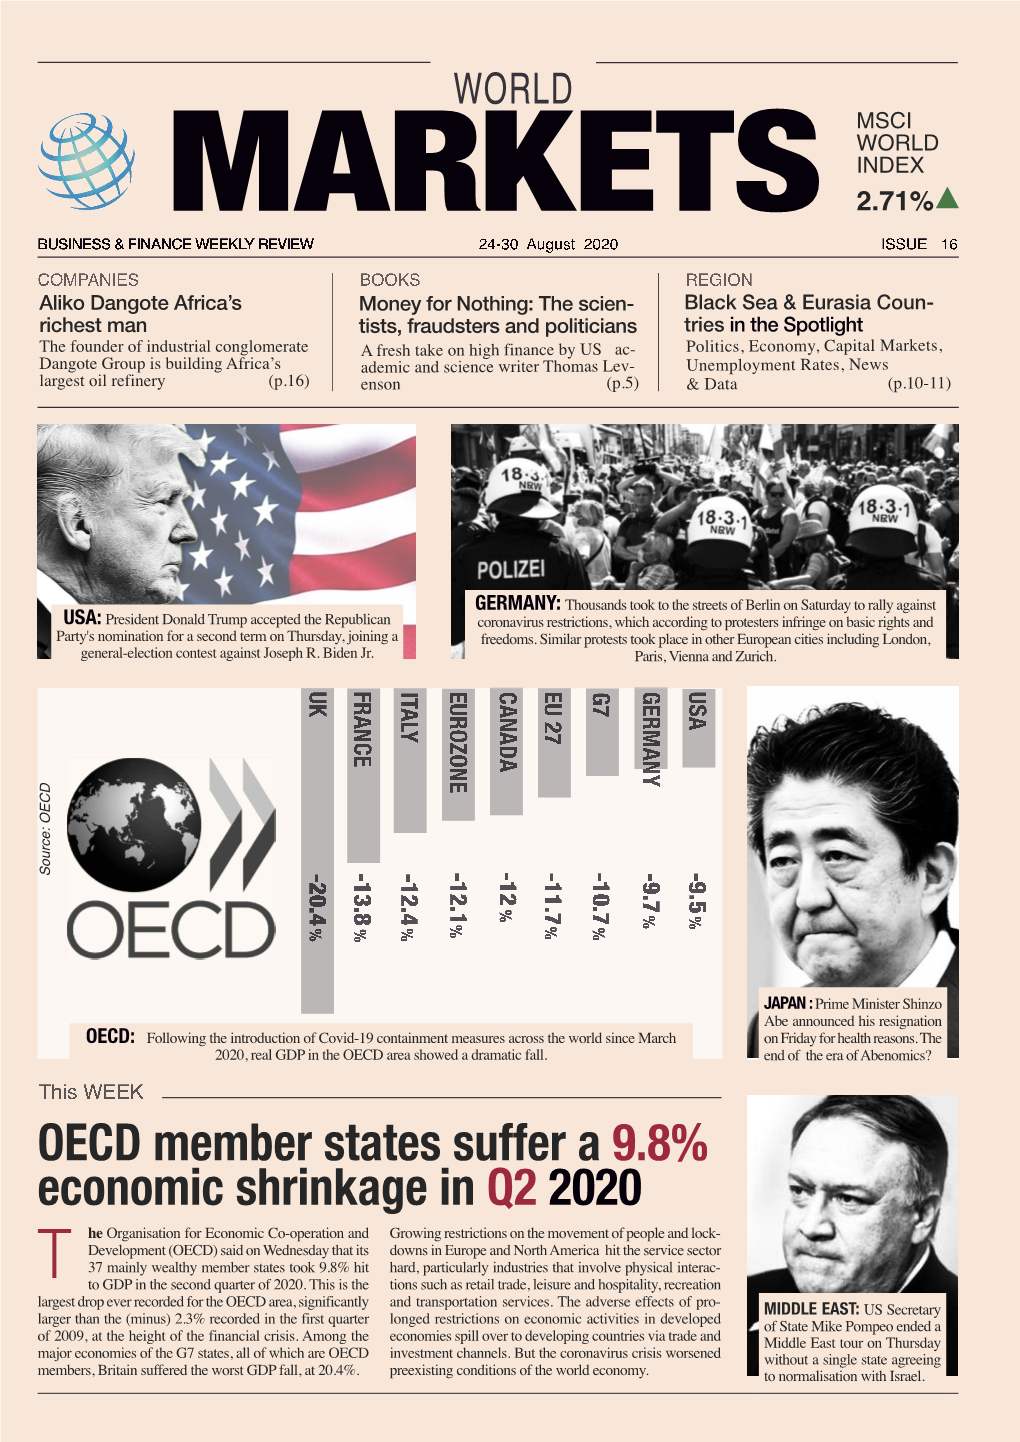 OECD Member States Suffer a 9.8% Economic Shrinkage in Q2 2020